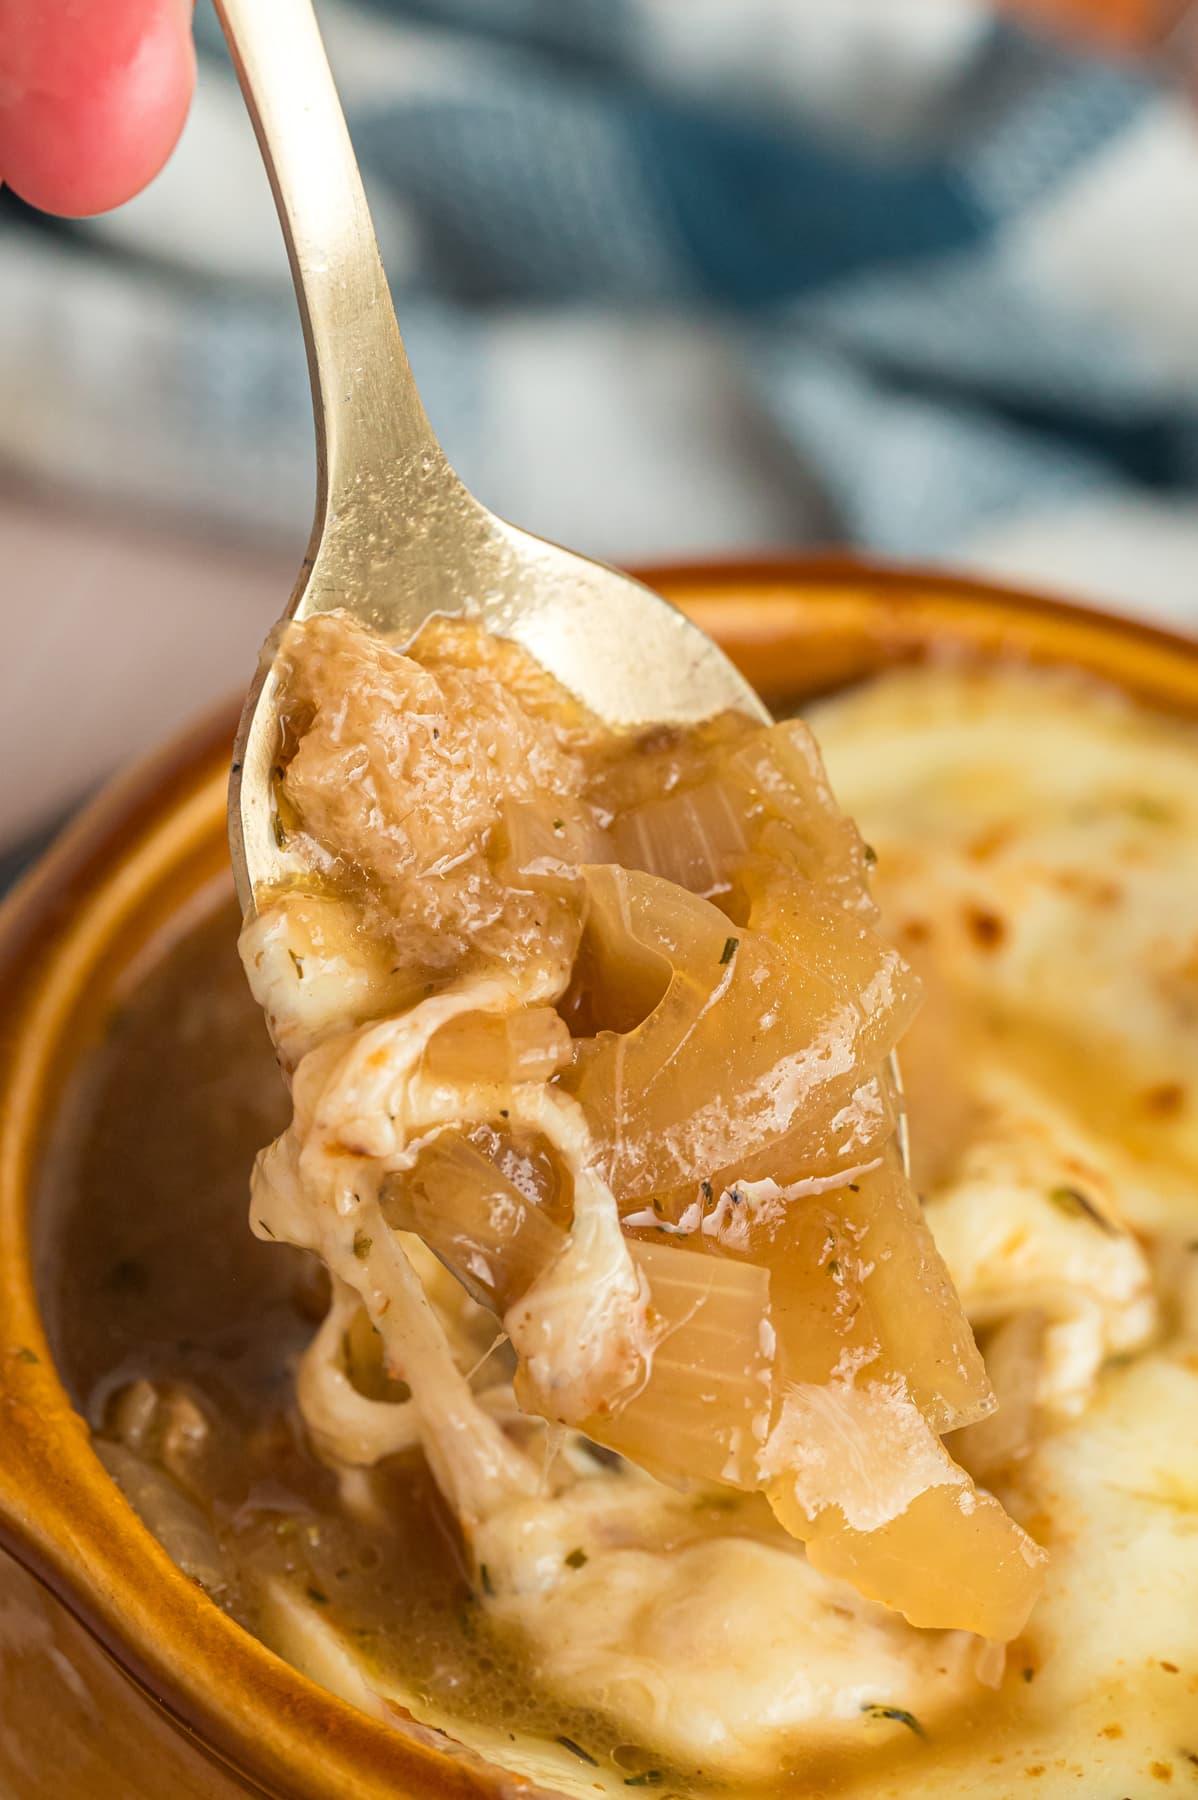 A spoon in a bowl of French onion soup showing the caramelized onions